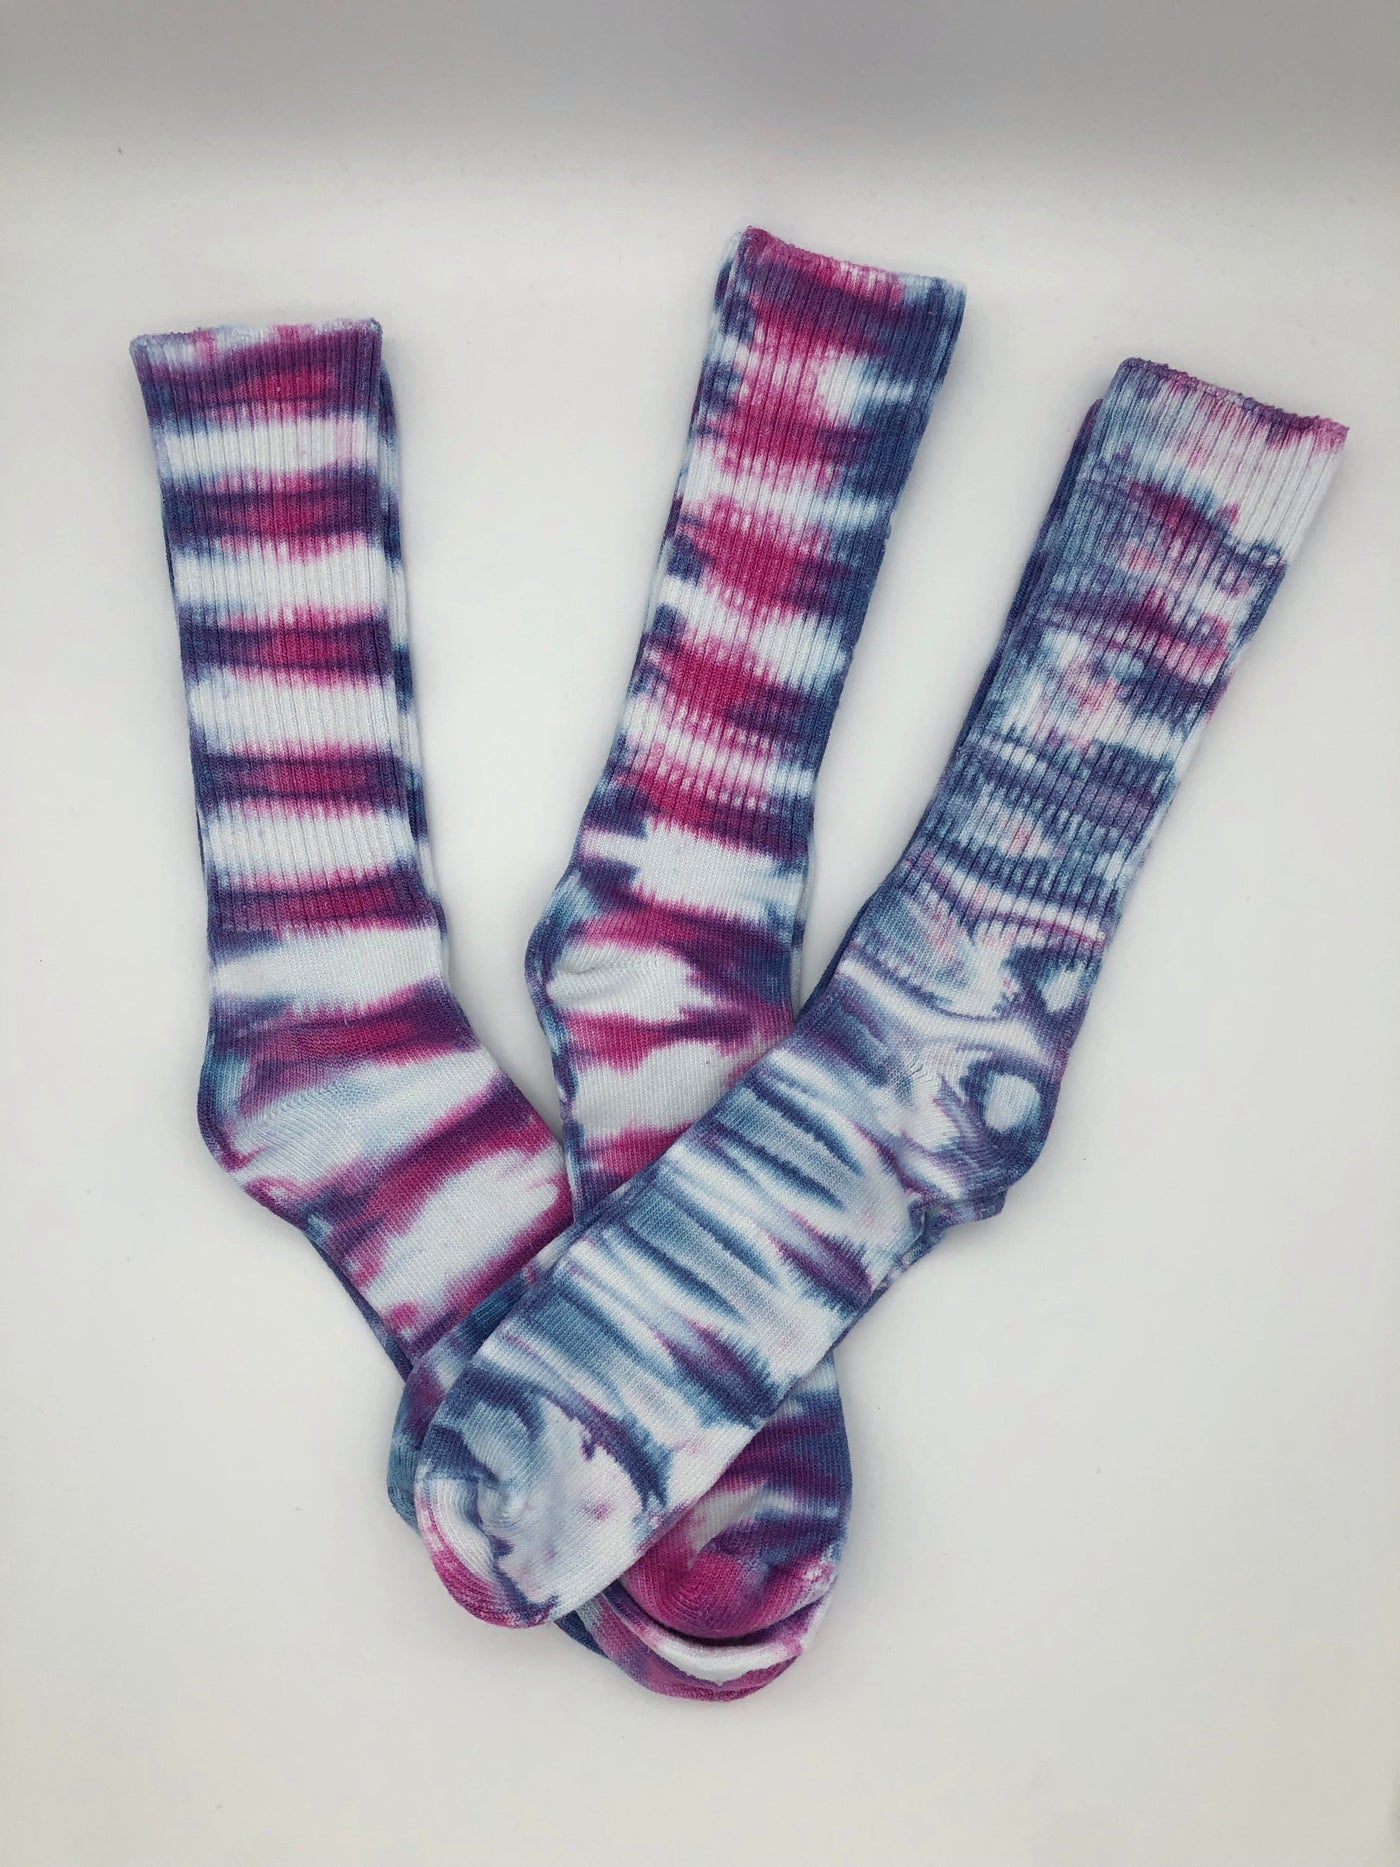 Bamboo Socks in Cotton Candy Adult Size